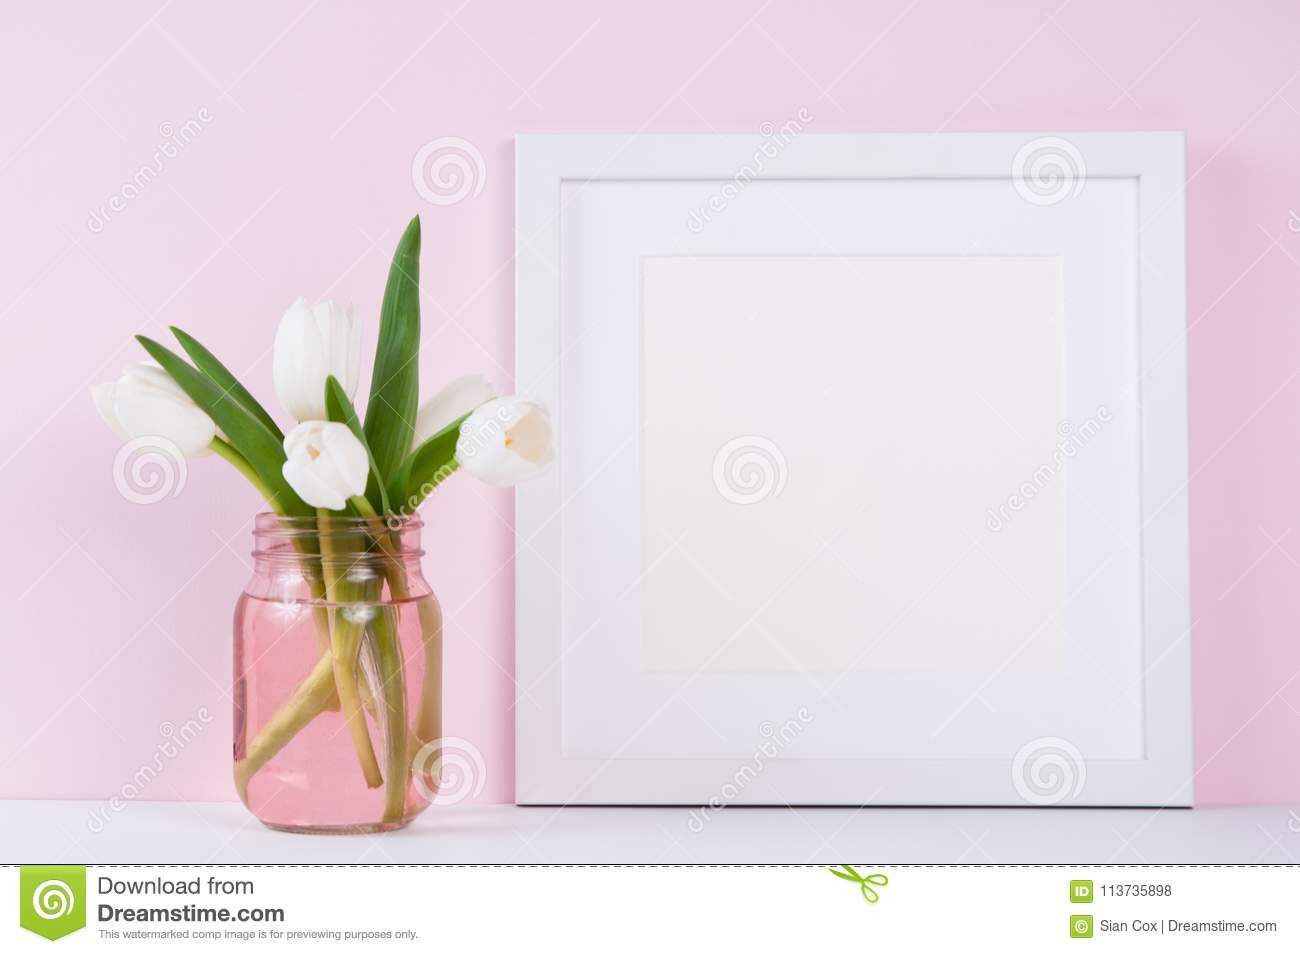 15 Stylish White Tulips In Glass Vase 2024 free download white tulips in glass vase of square frame mockup with tulips stock photo image of tulips mock with white square frame mockup with white tulips against a pink background